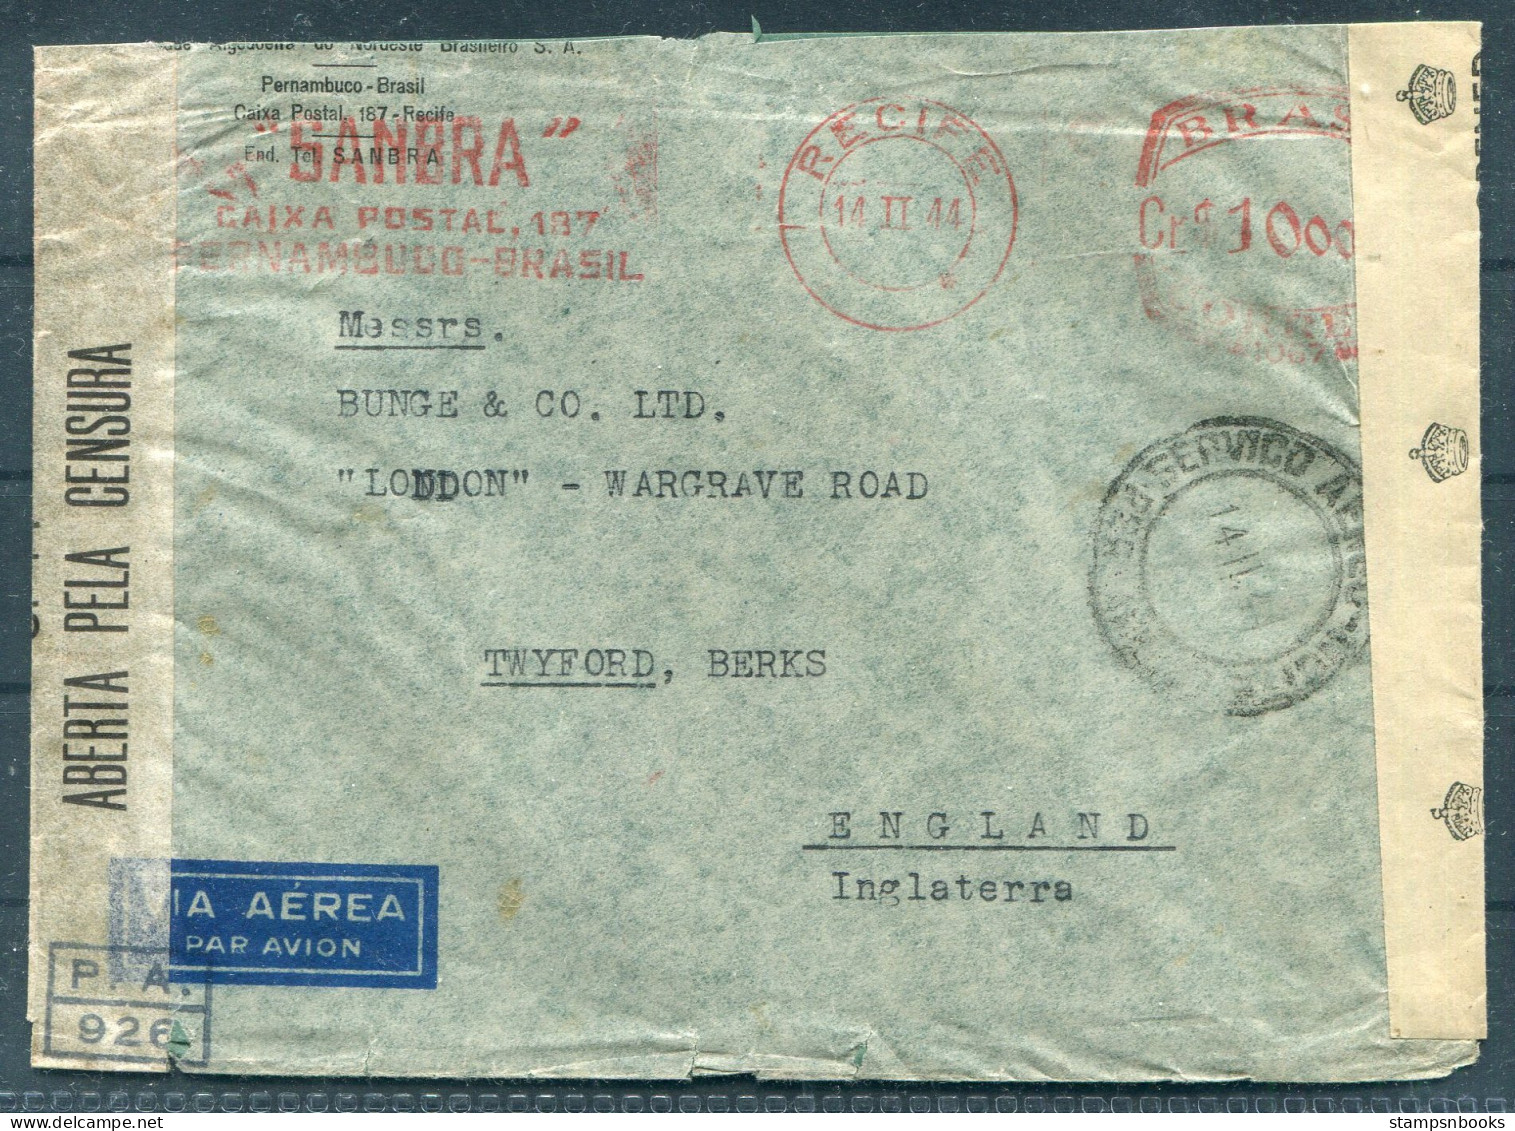 1944 Brazil Recife Franking Machine / Metermark Airmail Censor Cover - Wargrave Road, Twyford Berkshire England - Covers & Documents